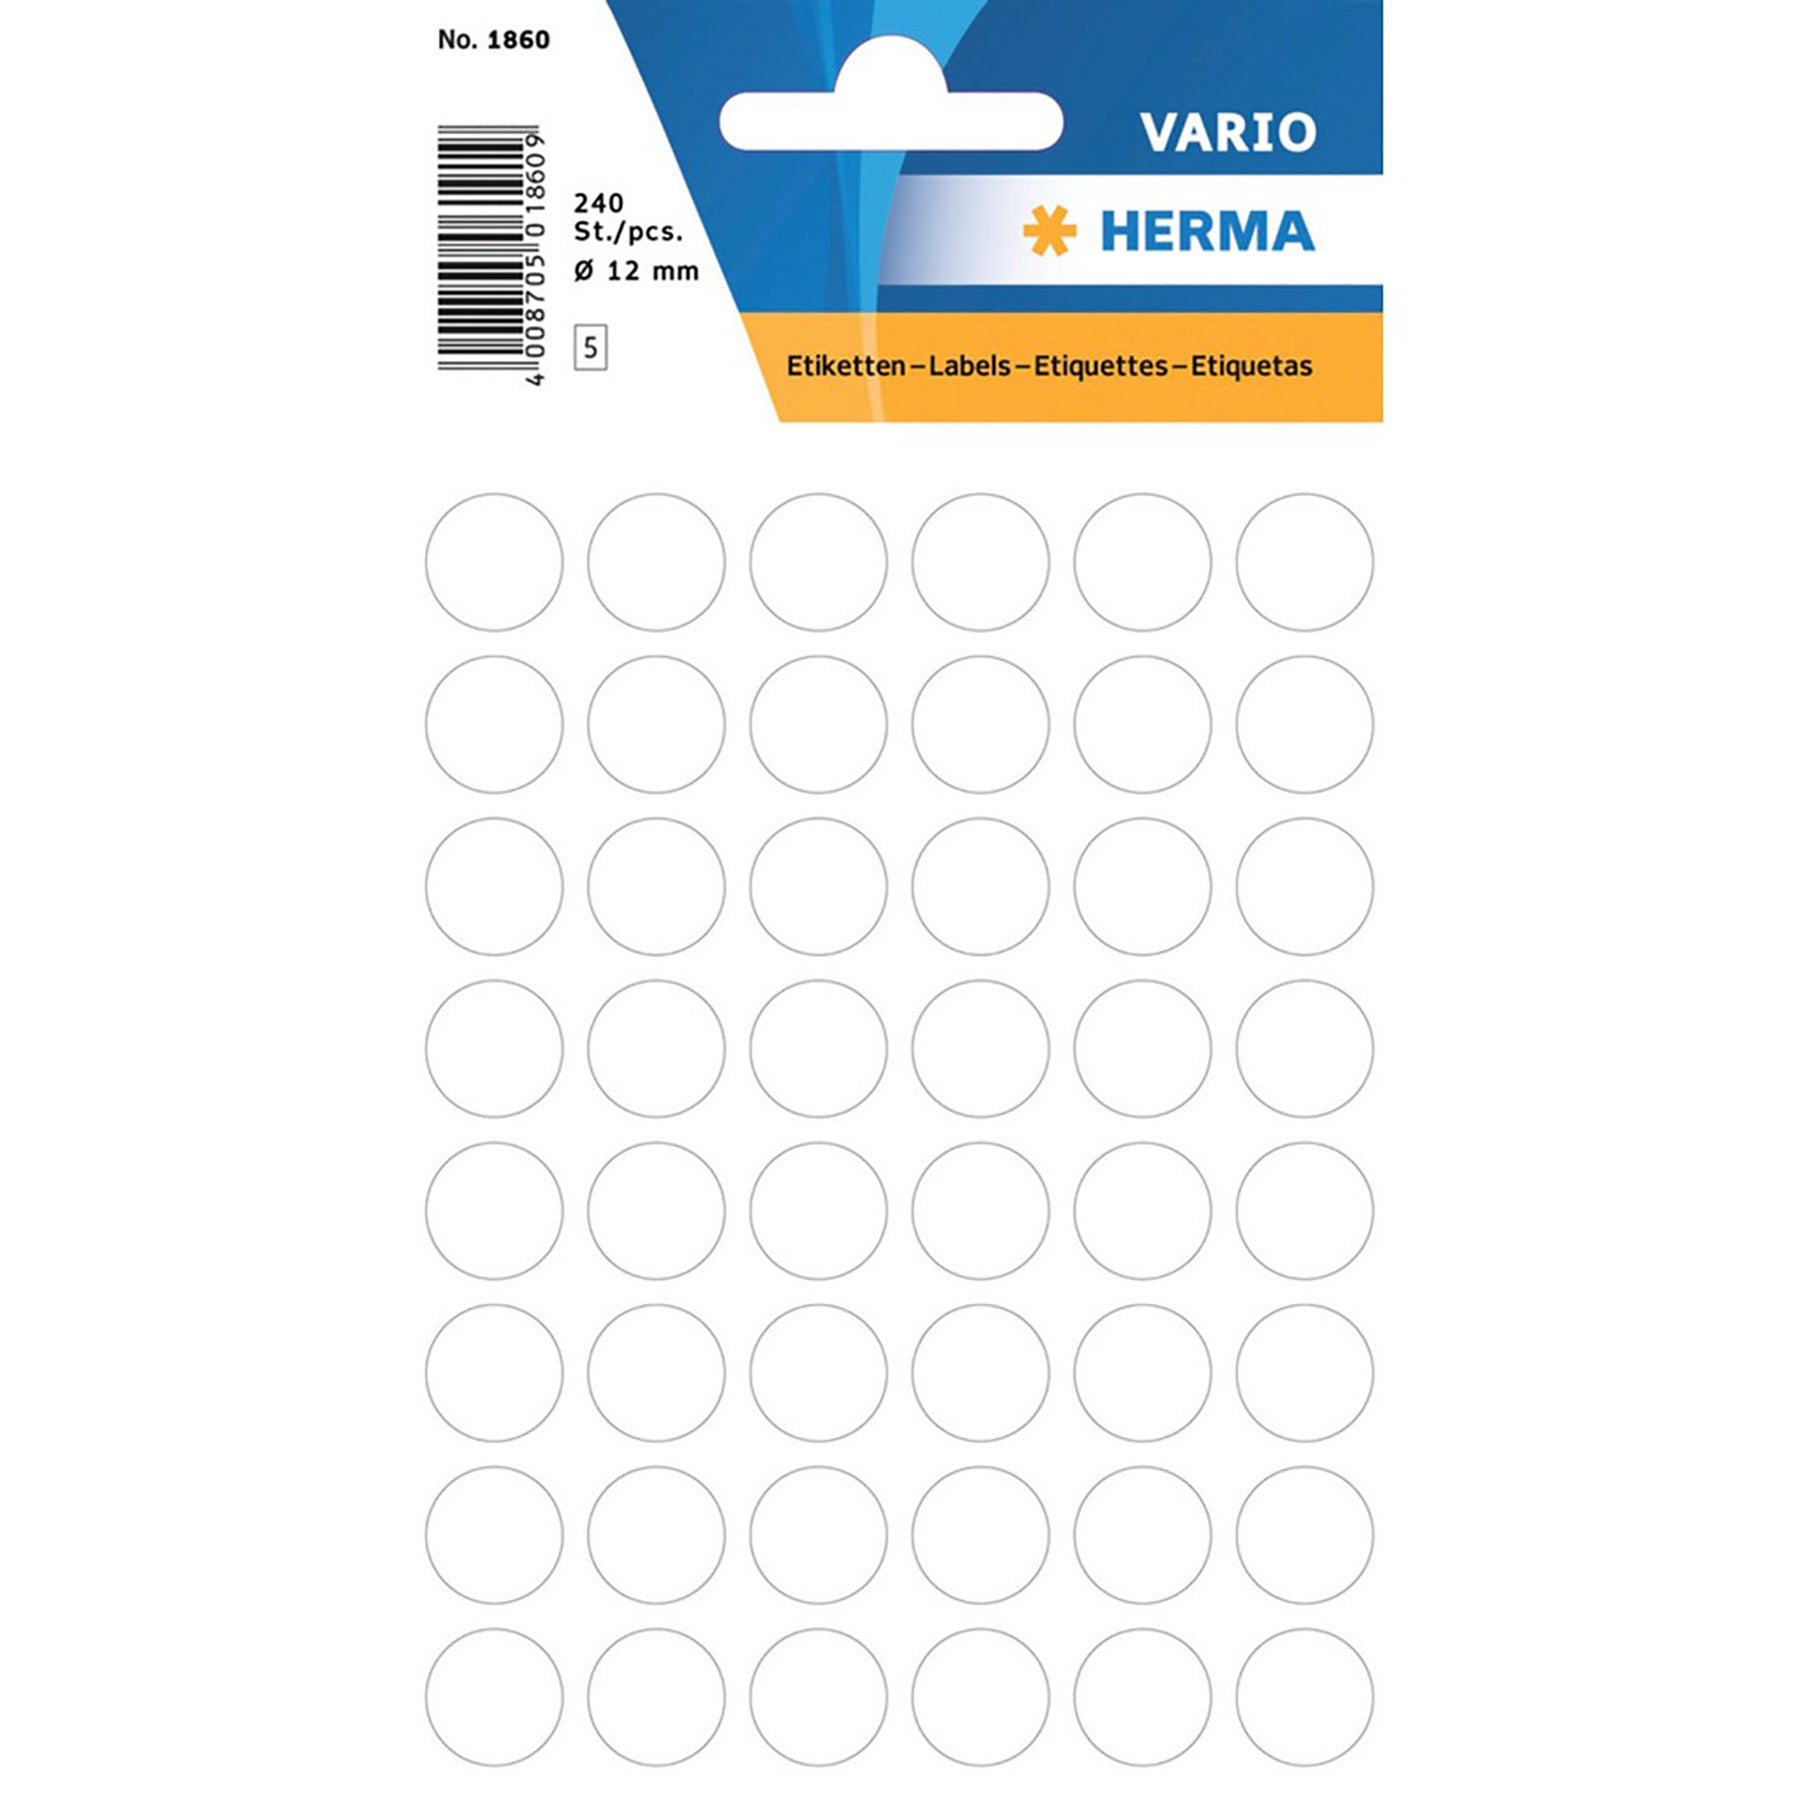 Herma Vario 5 Sheets Colour-Coding Round Labels Dots, White 0.47in 